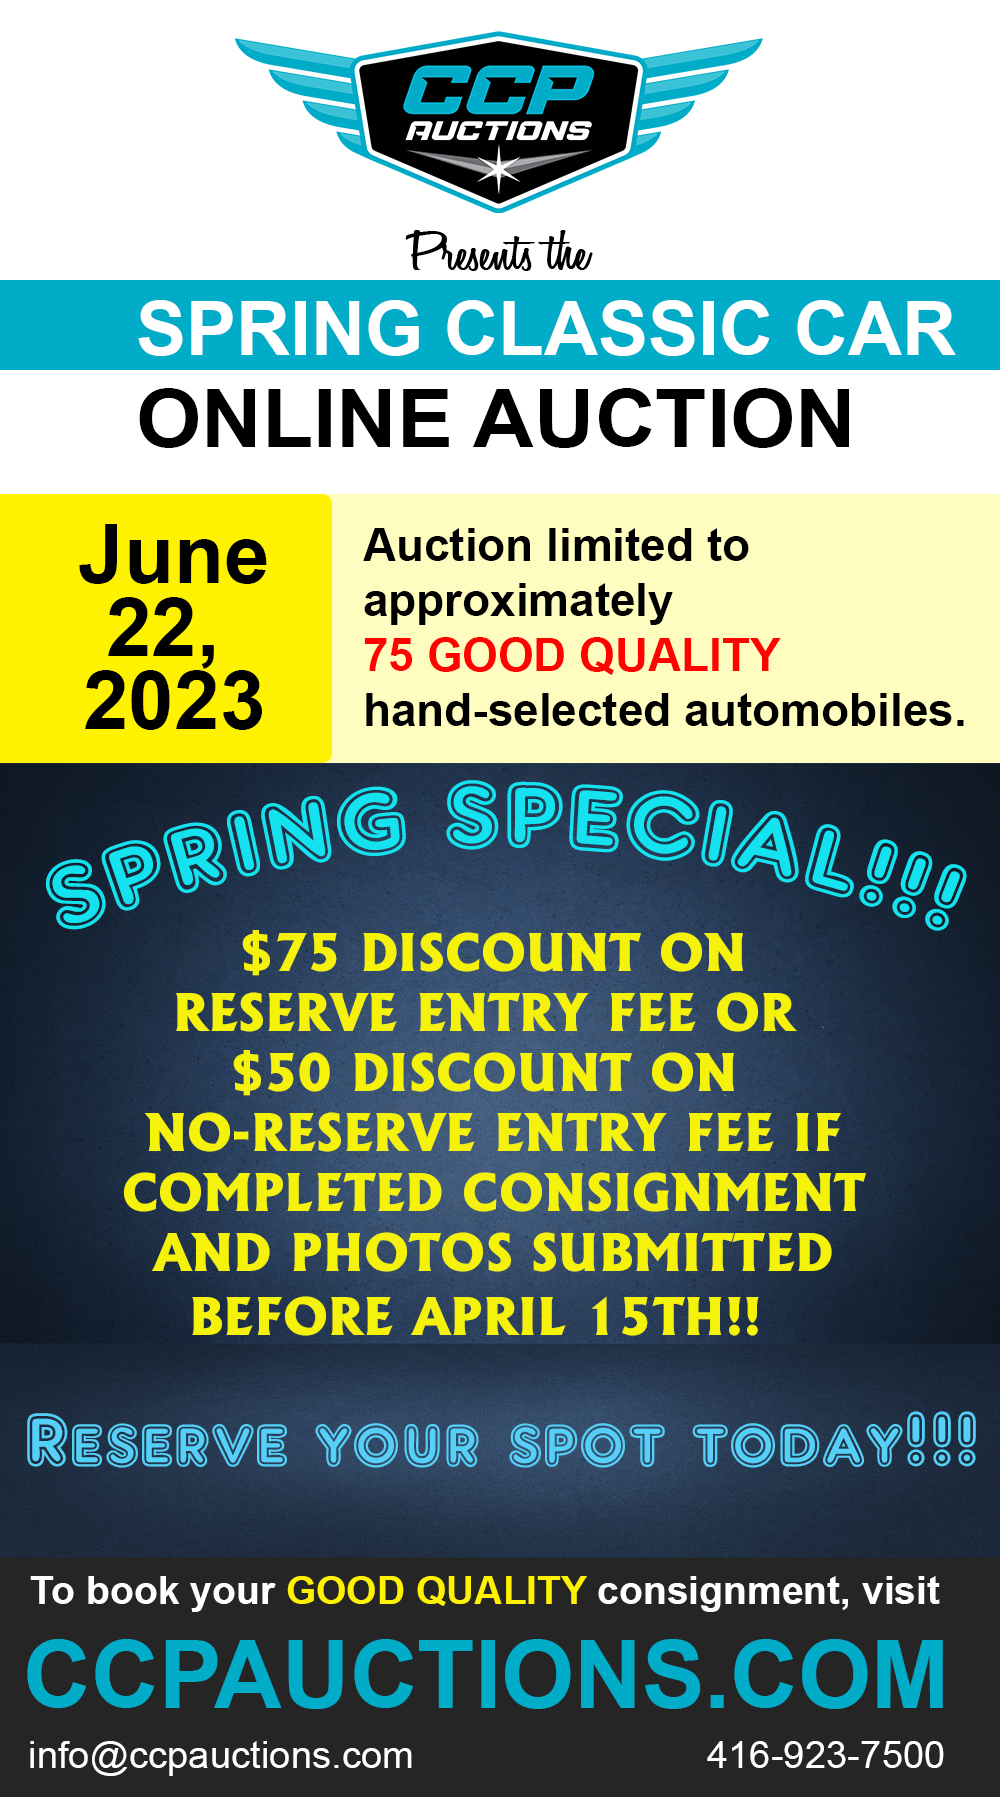 Featured image for “ONLINE SPRING ENTRY FEE SPECIAL!”